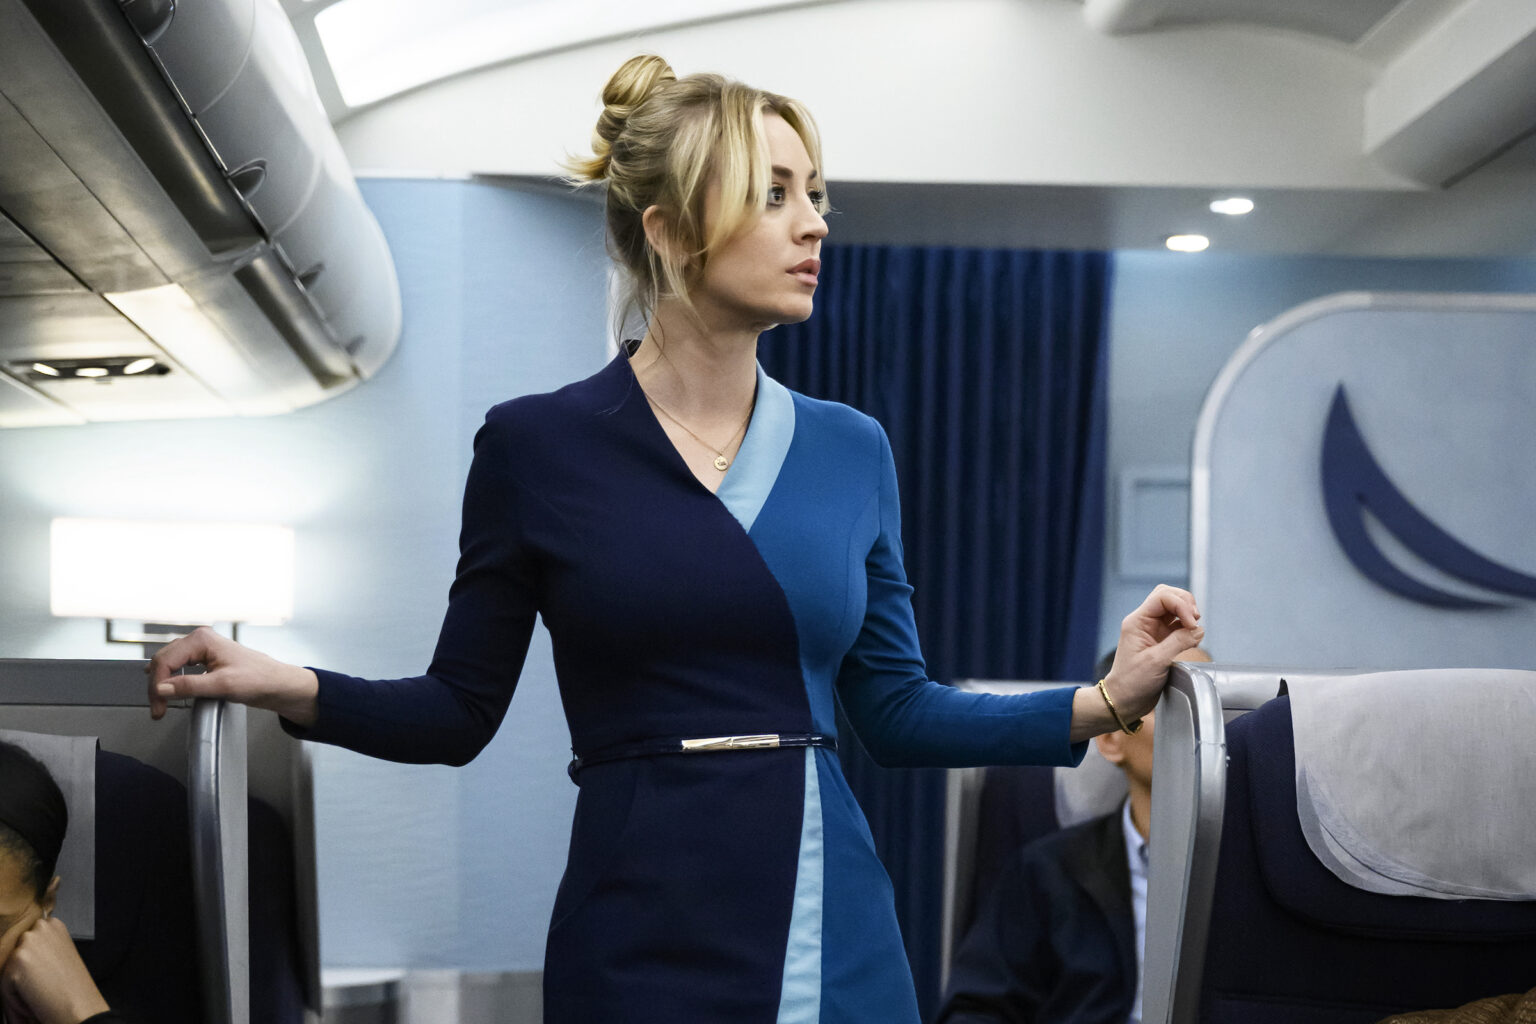 Are you on the search for something to bingewatch during your Thanksgiving break? Give the new show 'The Flight Attendant' a shot. Here's why.